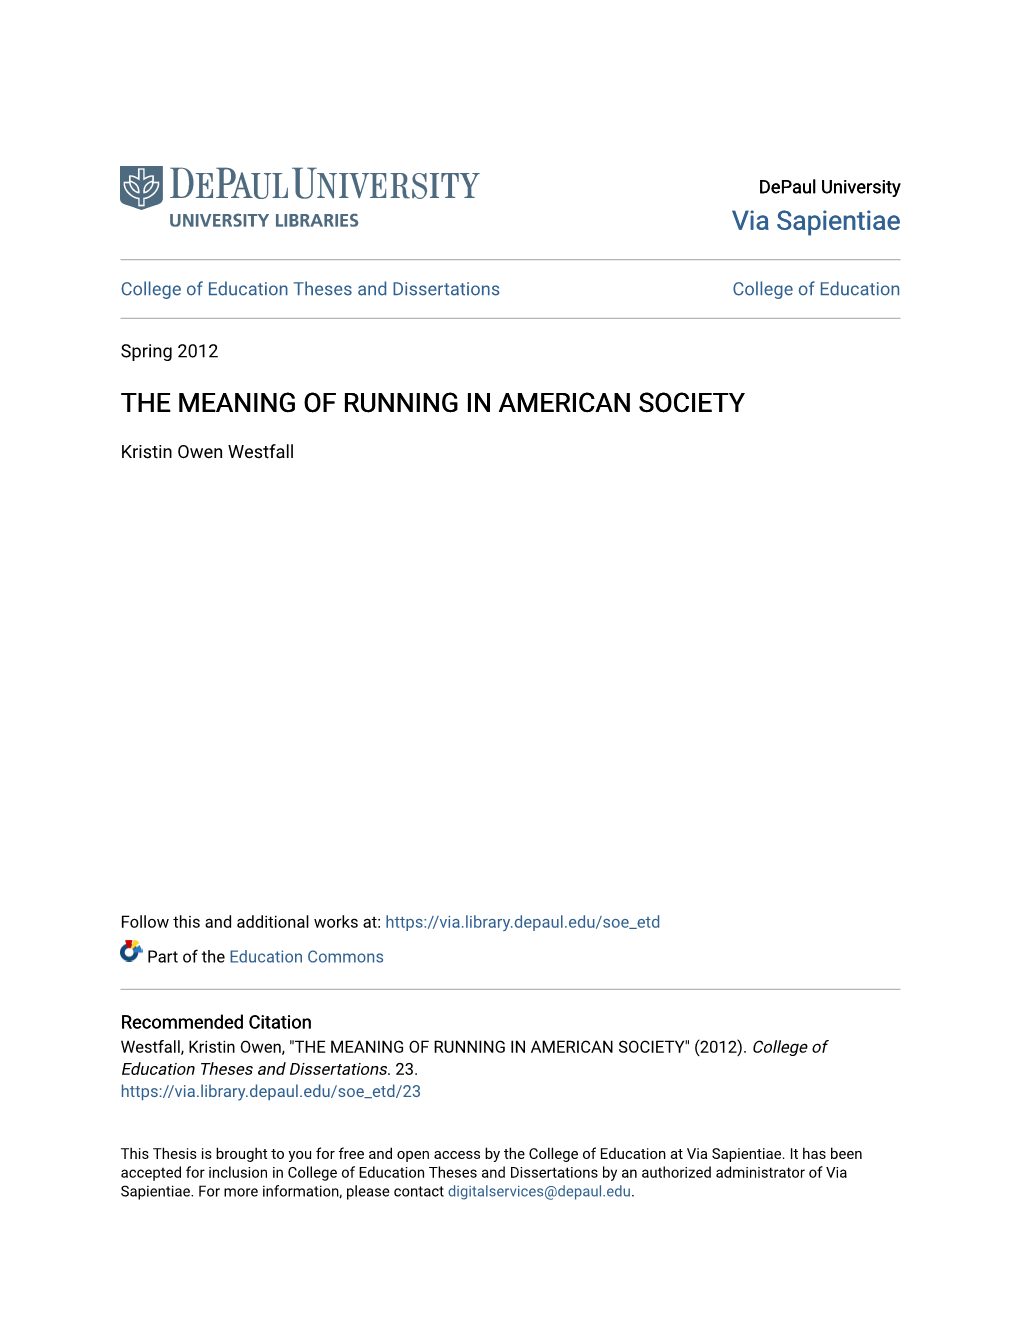 The Meaning of Running in American Society